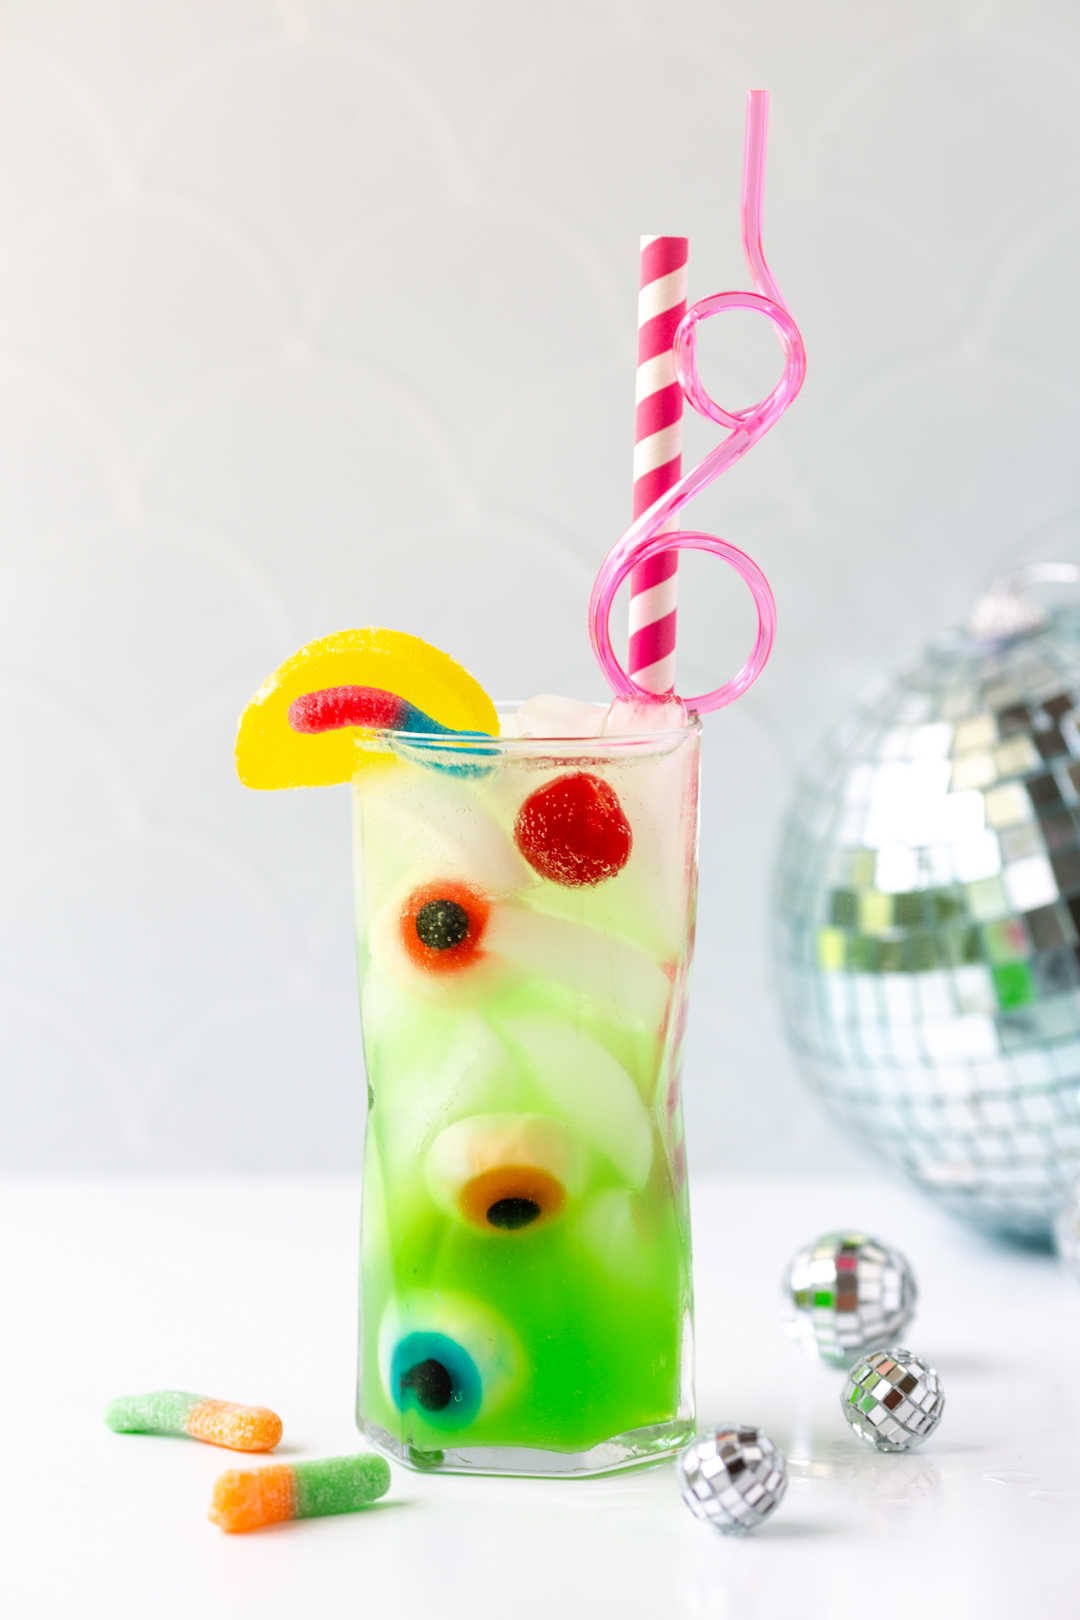 green tinted ghoul juice  inspired by monster high: the movie with fun pink straws, gummy eyeballs, gummy worms and candy lemon.